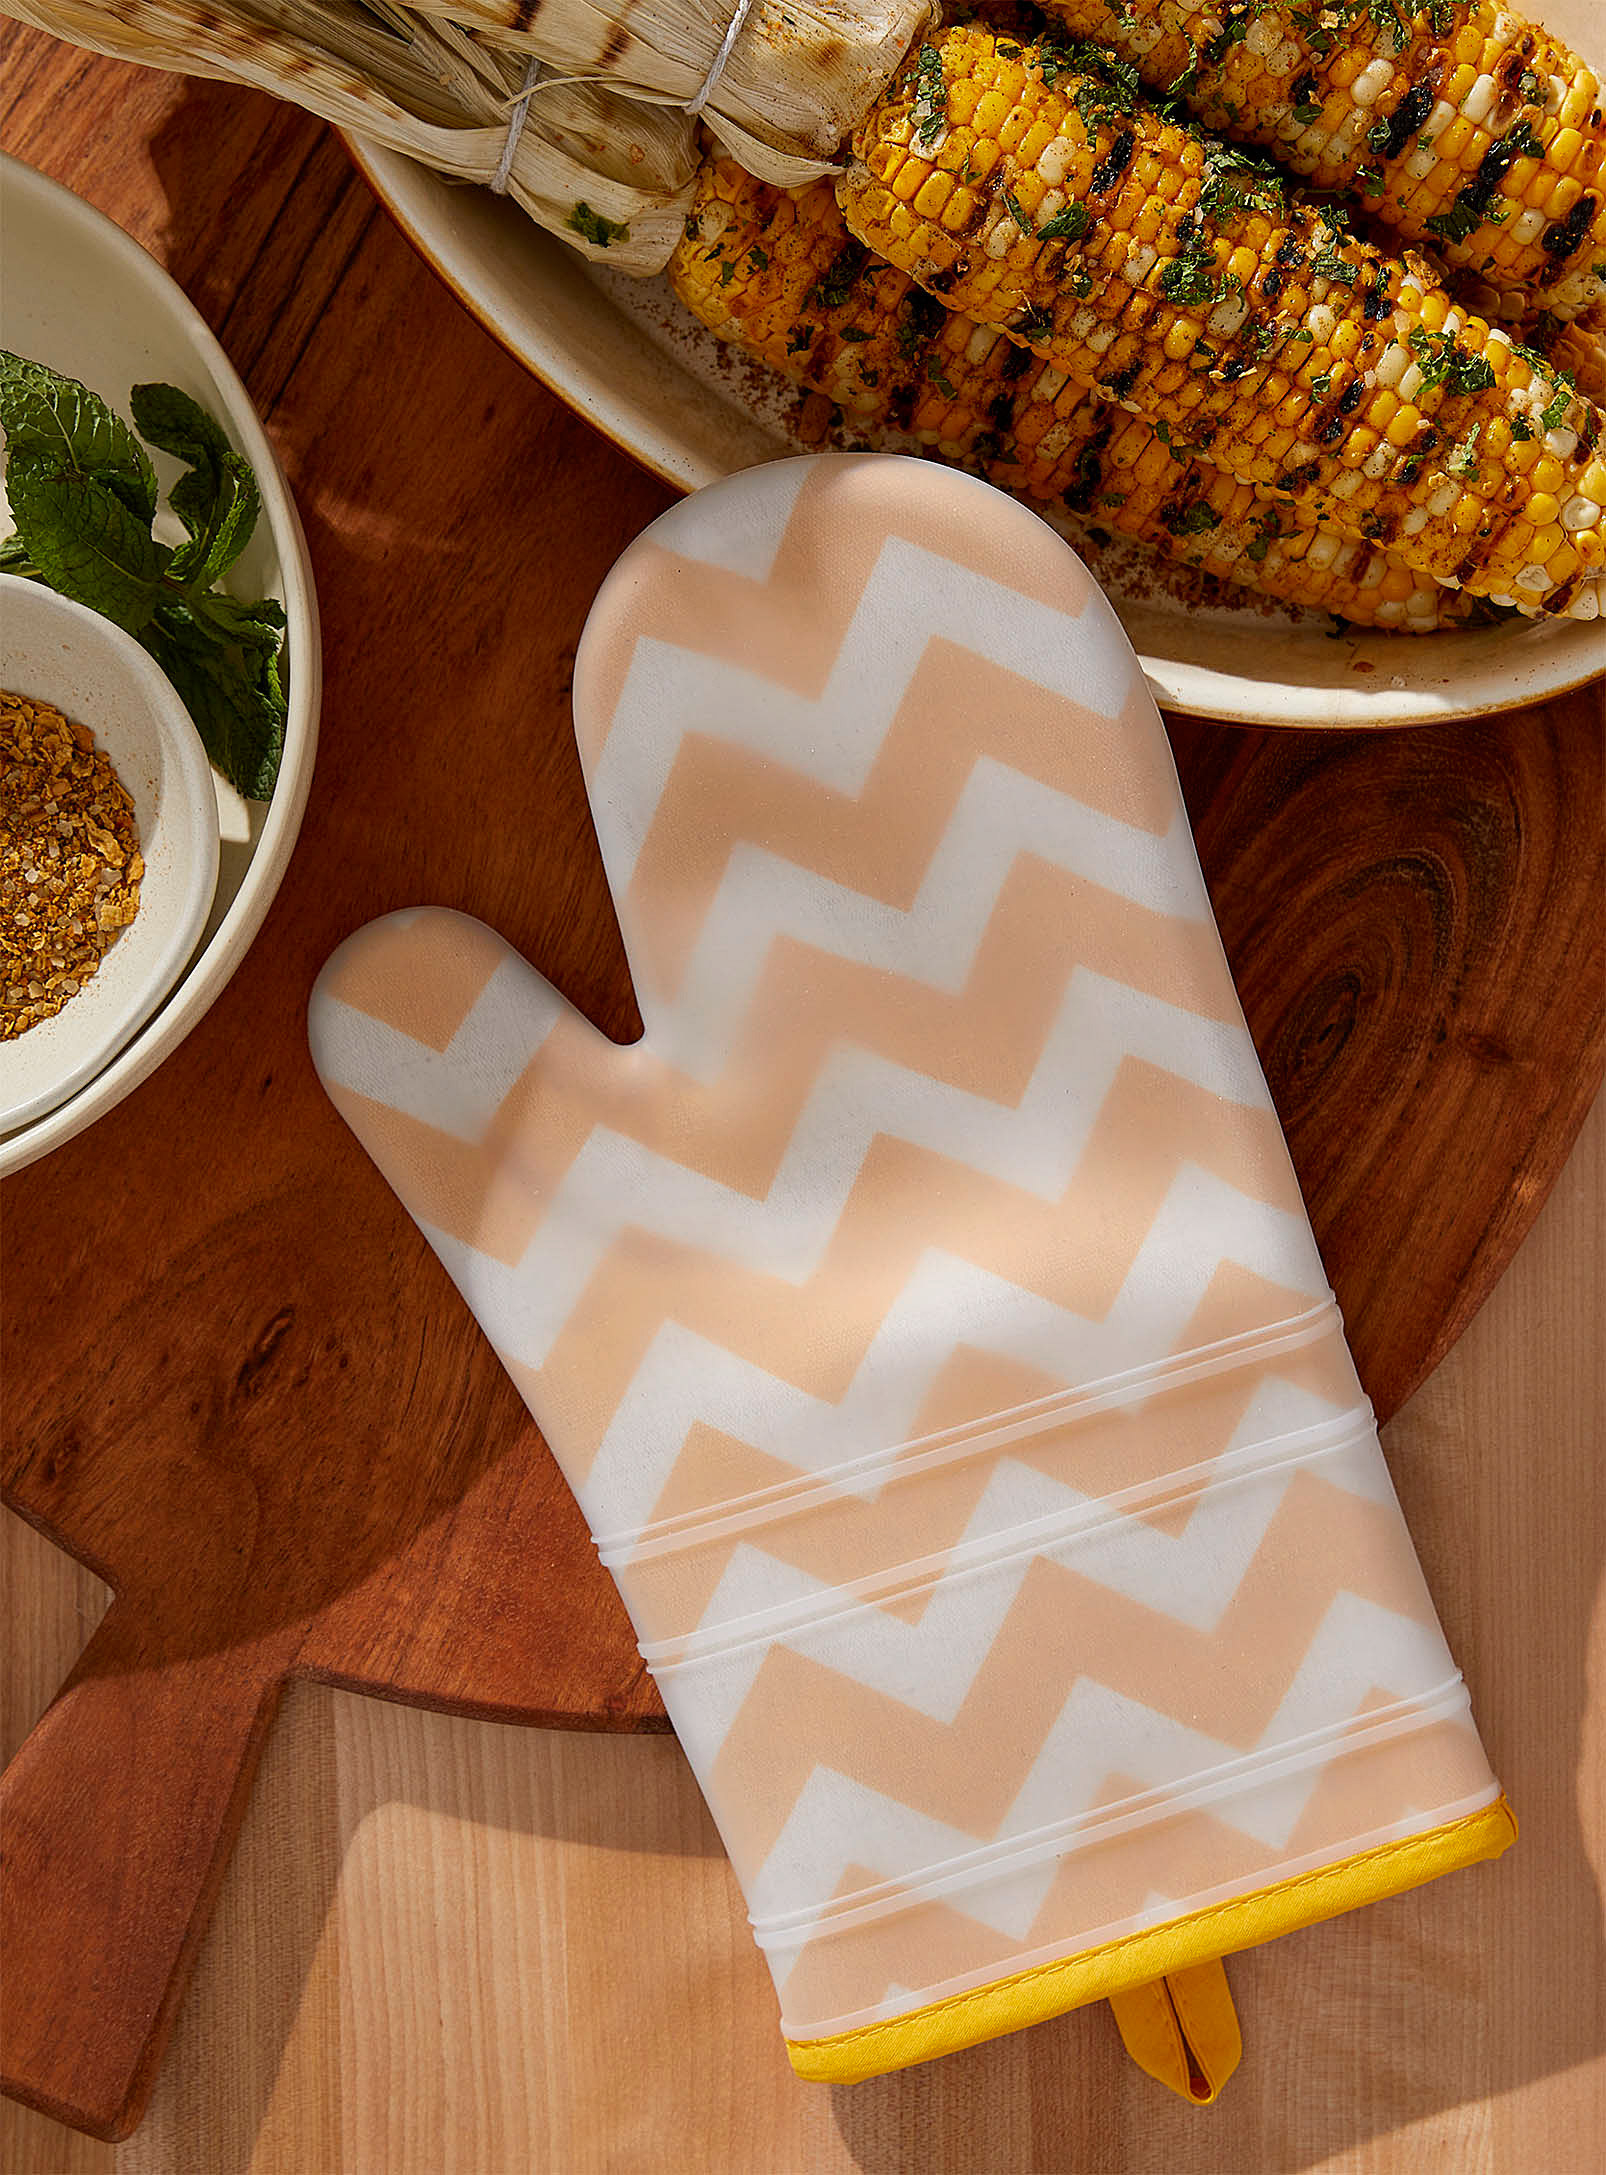 An oven mitt on a wooden table